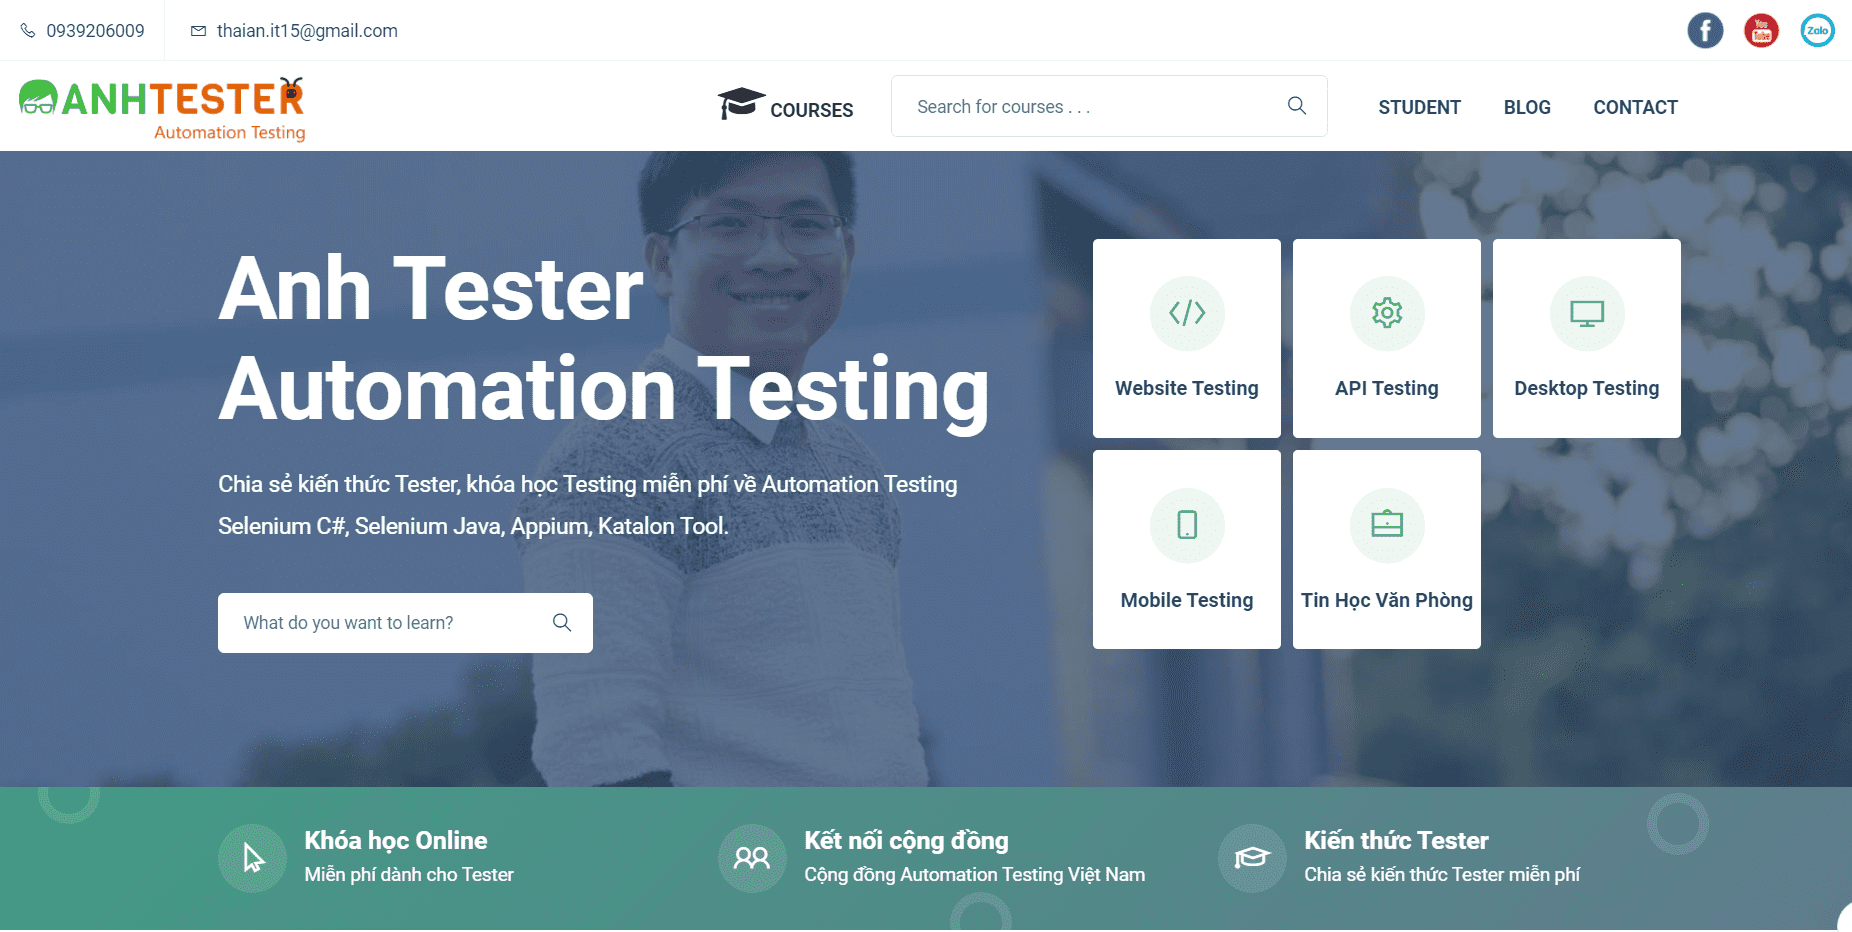 Anh Tester - Automation Testing - 9 website tự học tester miễn phí | Anh Tester